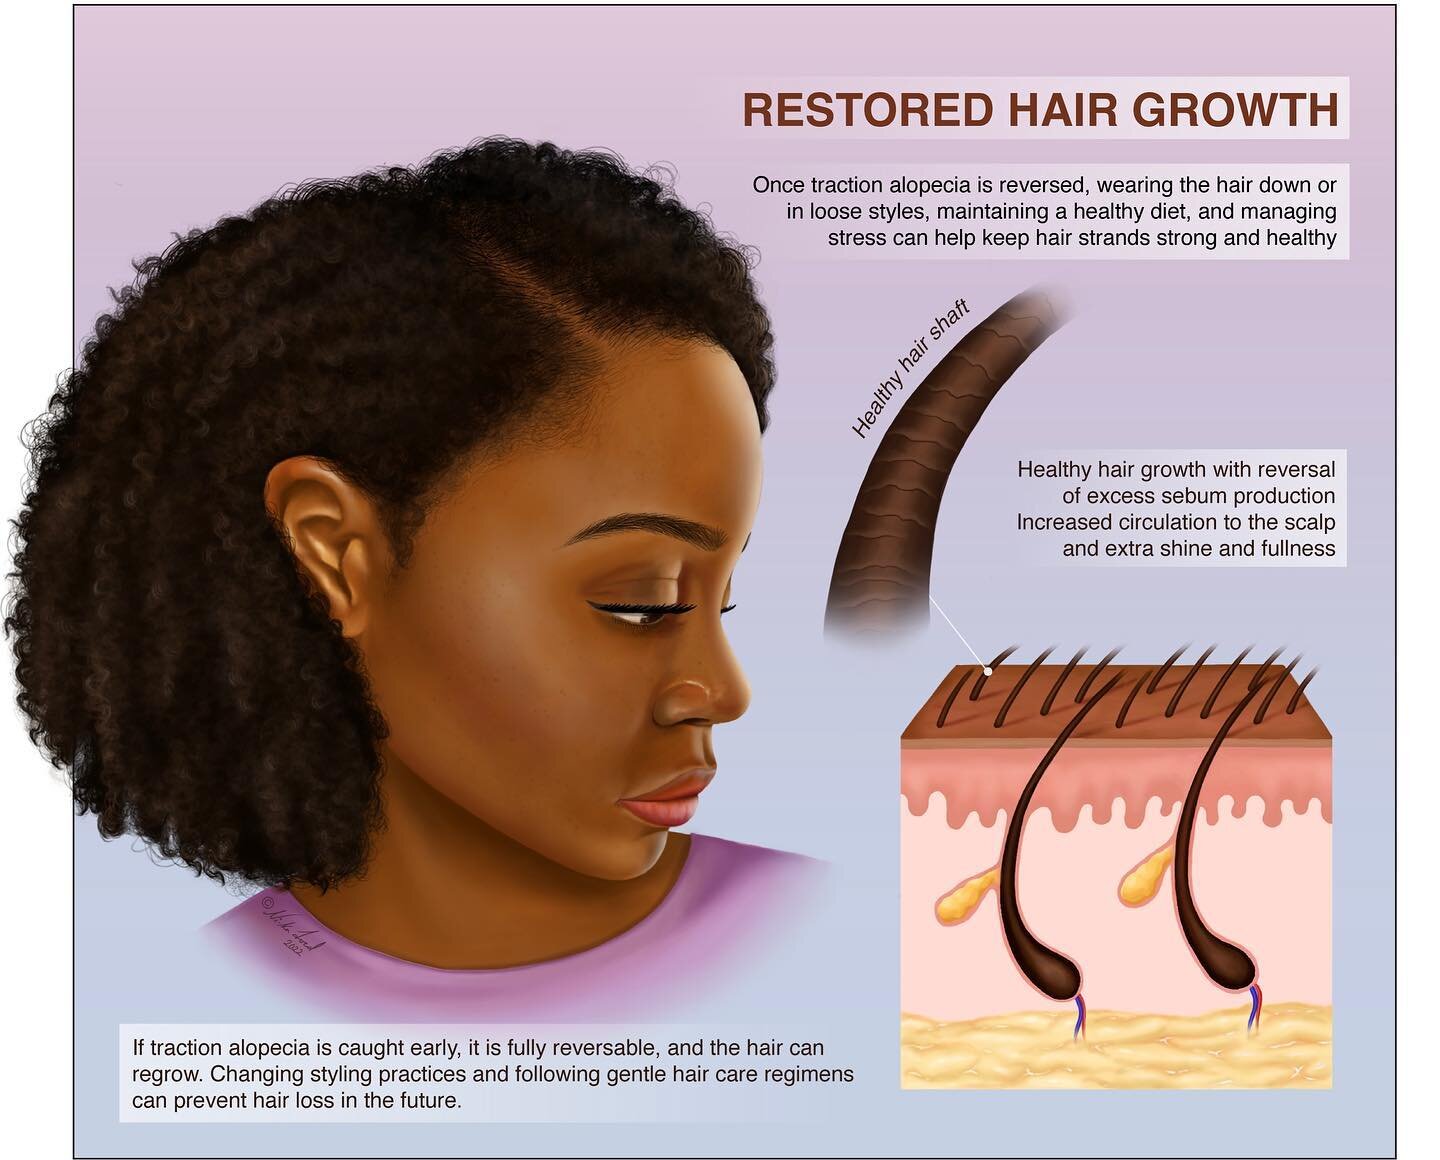 I really enjoyed working on this project because&nbsp;it made me reflect on my own relationship with my hair. When I was younger I remember using products made by brands like&nbsp;Loreal and Garnier Fructis which weren't made for afro hair. There wer